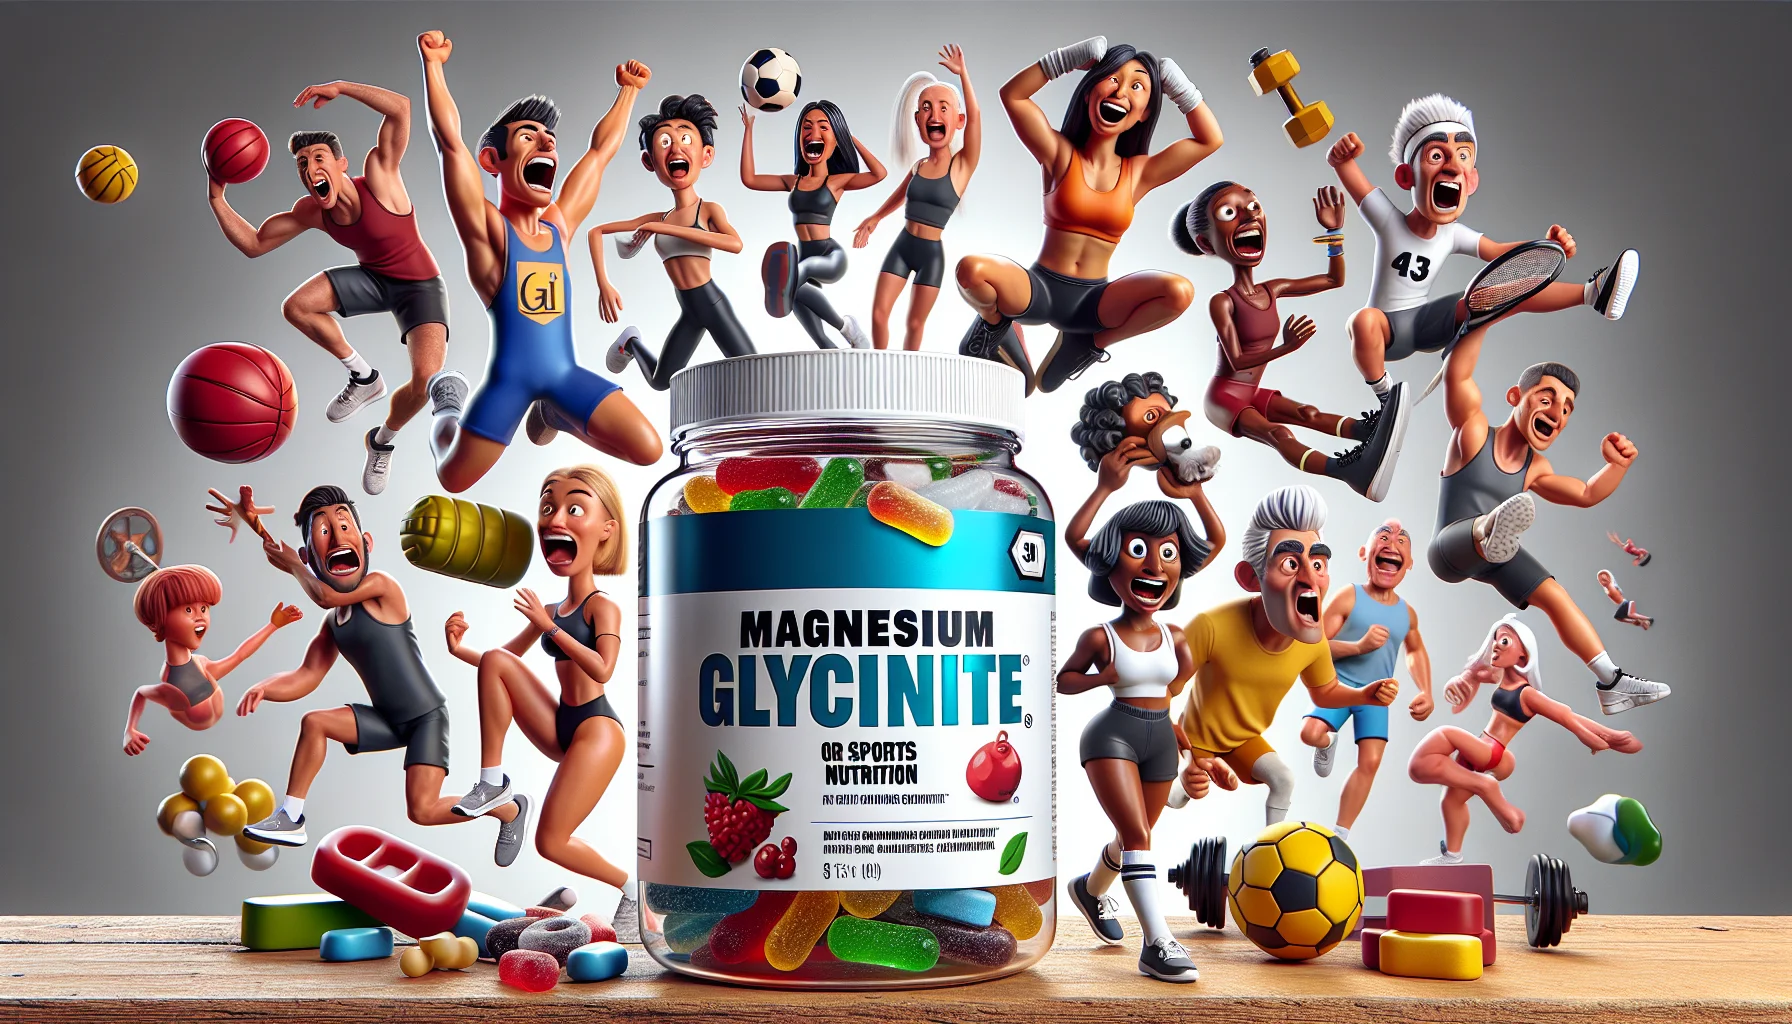 Generate an engaging and whimsical image showcasing magnesium glycinate gummies intended for sports nutrition. Imagine a humorous scenario where a prominently displayed jar of these gummies takes center stage. In the background, an array of diverse cartoonish characters representing people of different genders and descents, such as East Asian, Caucasian, and Middle-Eastern, are engaged in various sports activities. The human characters are showing exaggerated expressions of excitement and enthusiasm, adding to the humorous appeal. One character might be energetically doing gymnastics, another enthusiastically kicking a soccer ball, and another triumphantly lifting a dumbbell. The vibrant colors and humor in the scene should make the gummies seem fun, desirable, and beneficial for sports performance.